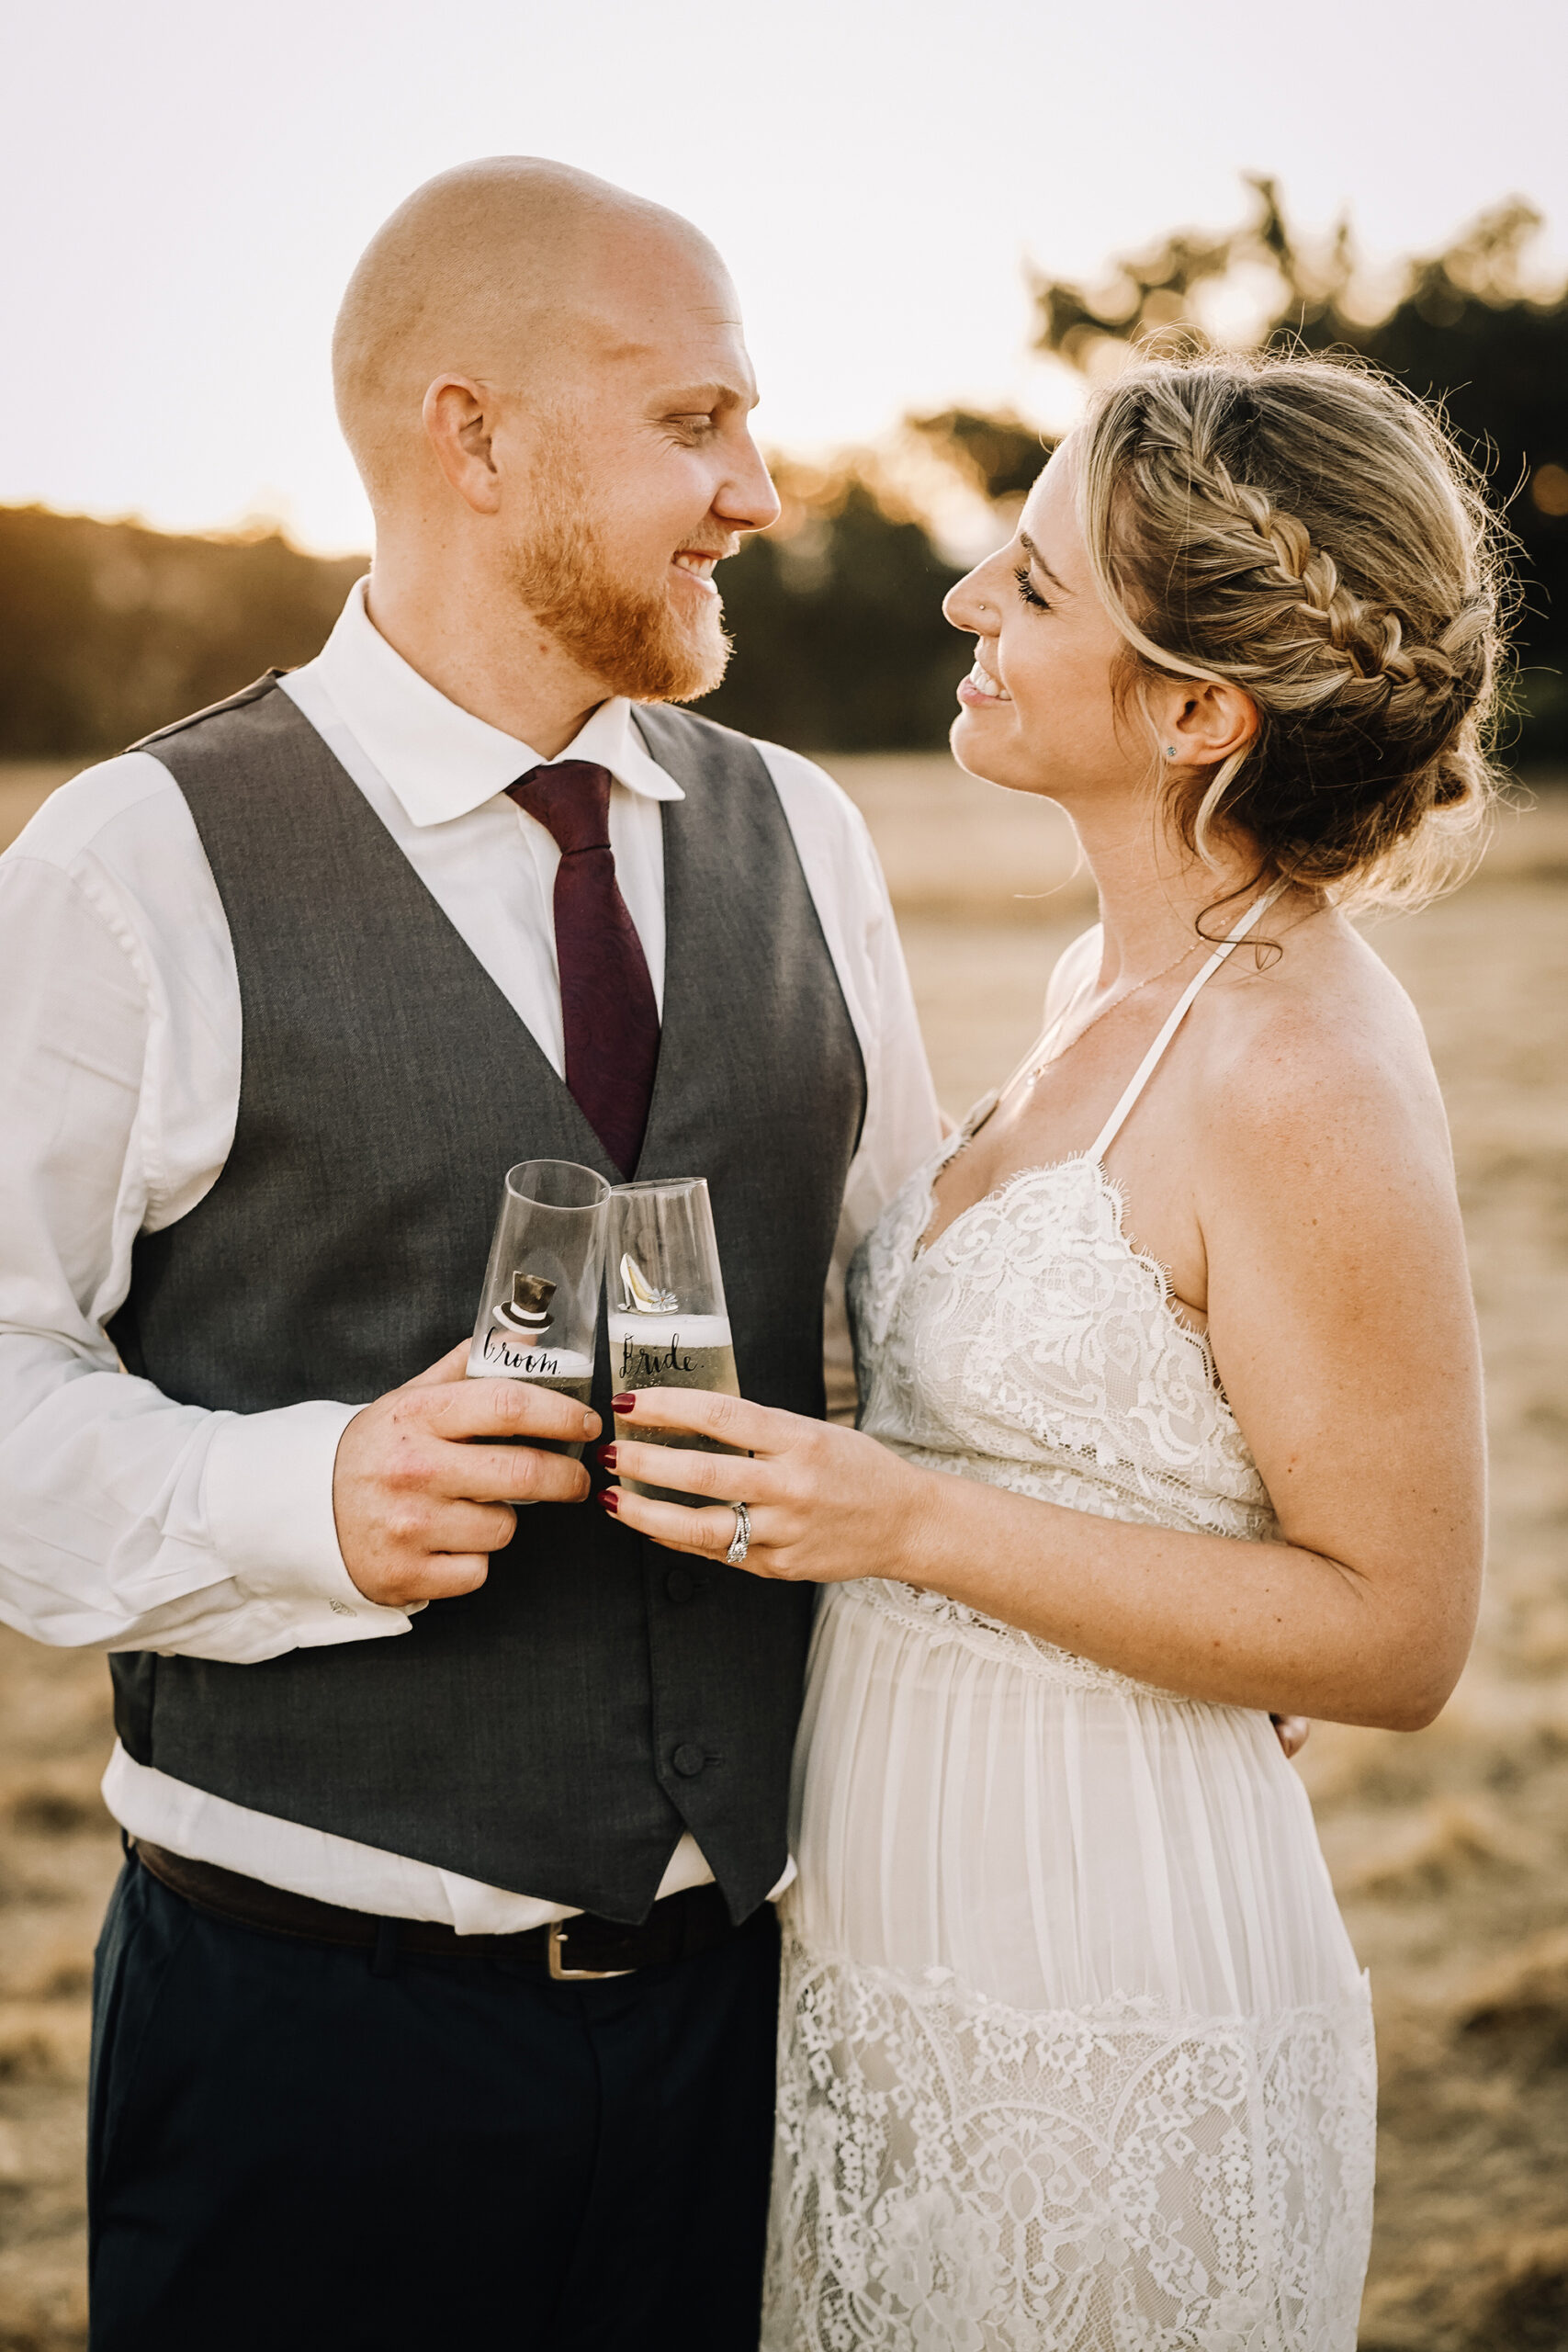 Kristen Carter Rustic Winery Wedding KDot Photography 052 scaled